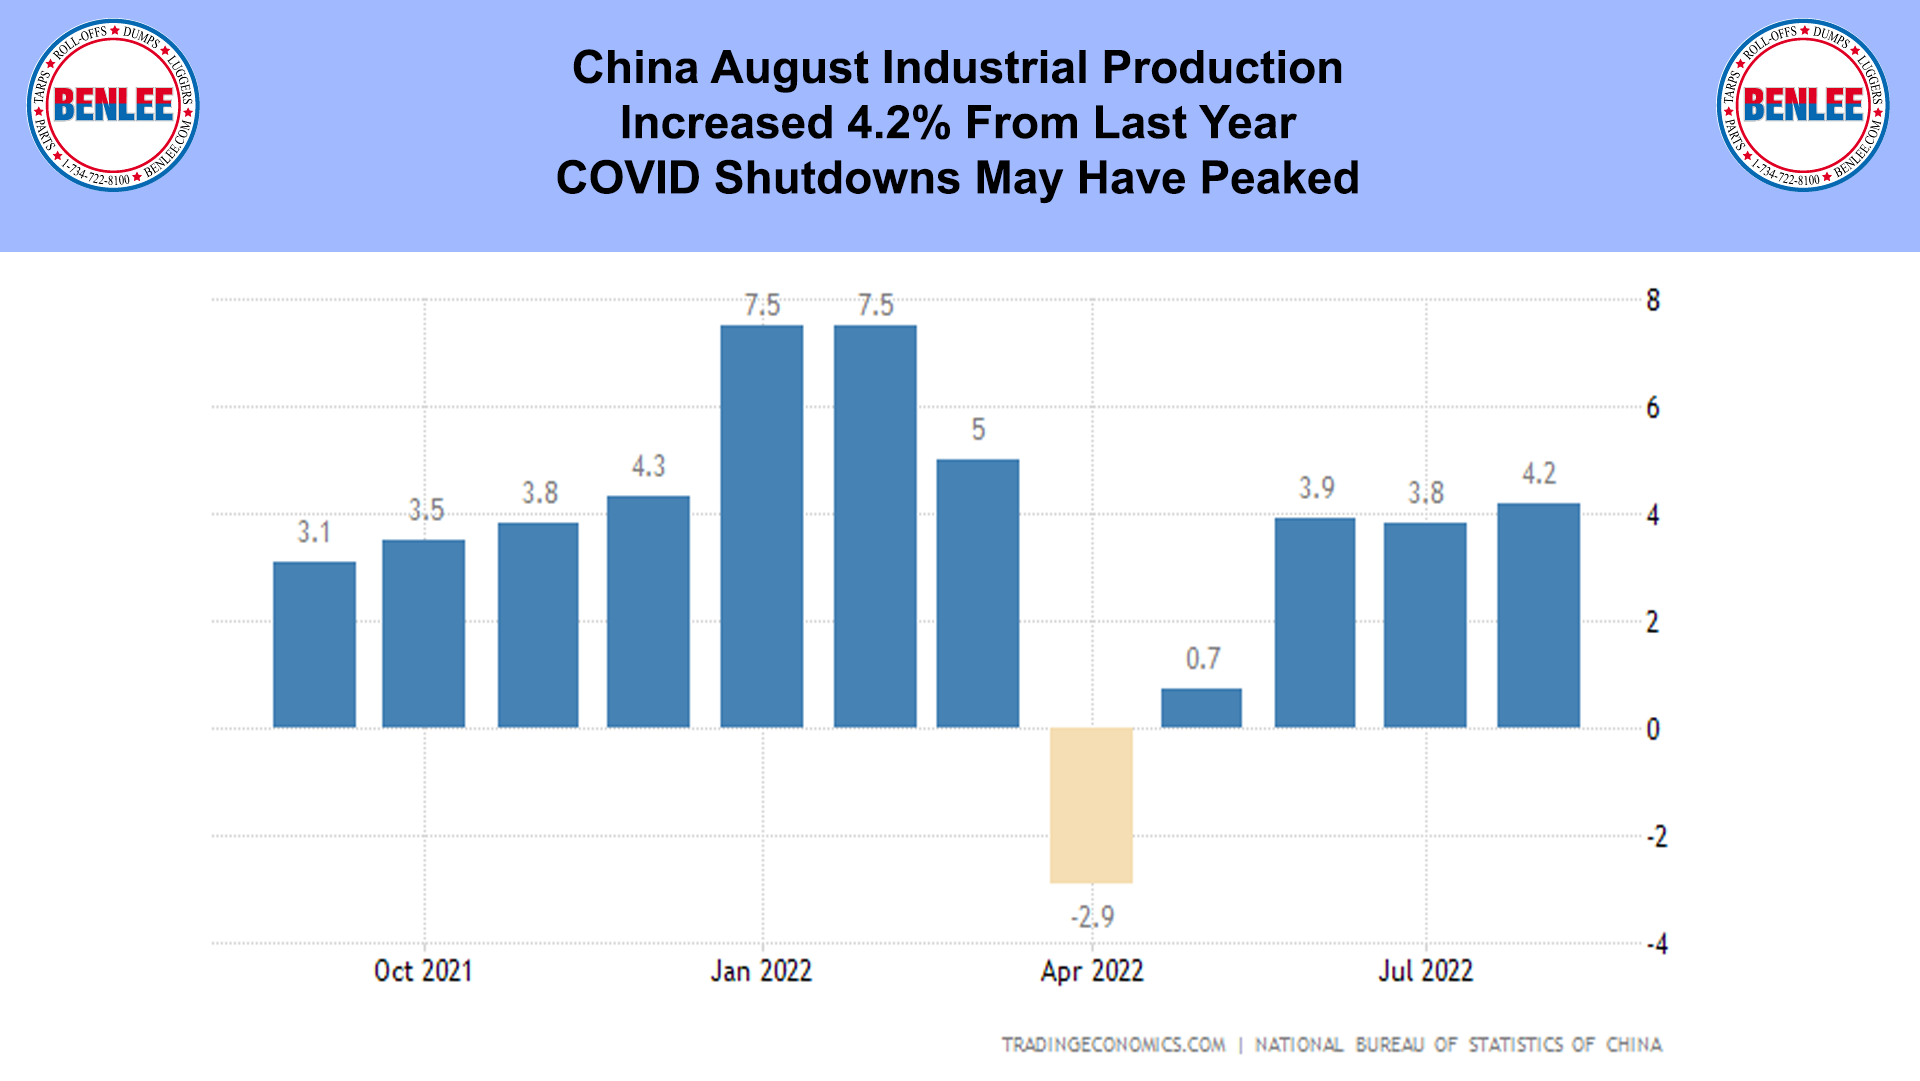 China August Industrial Production